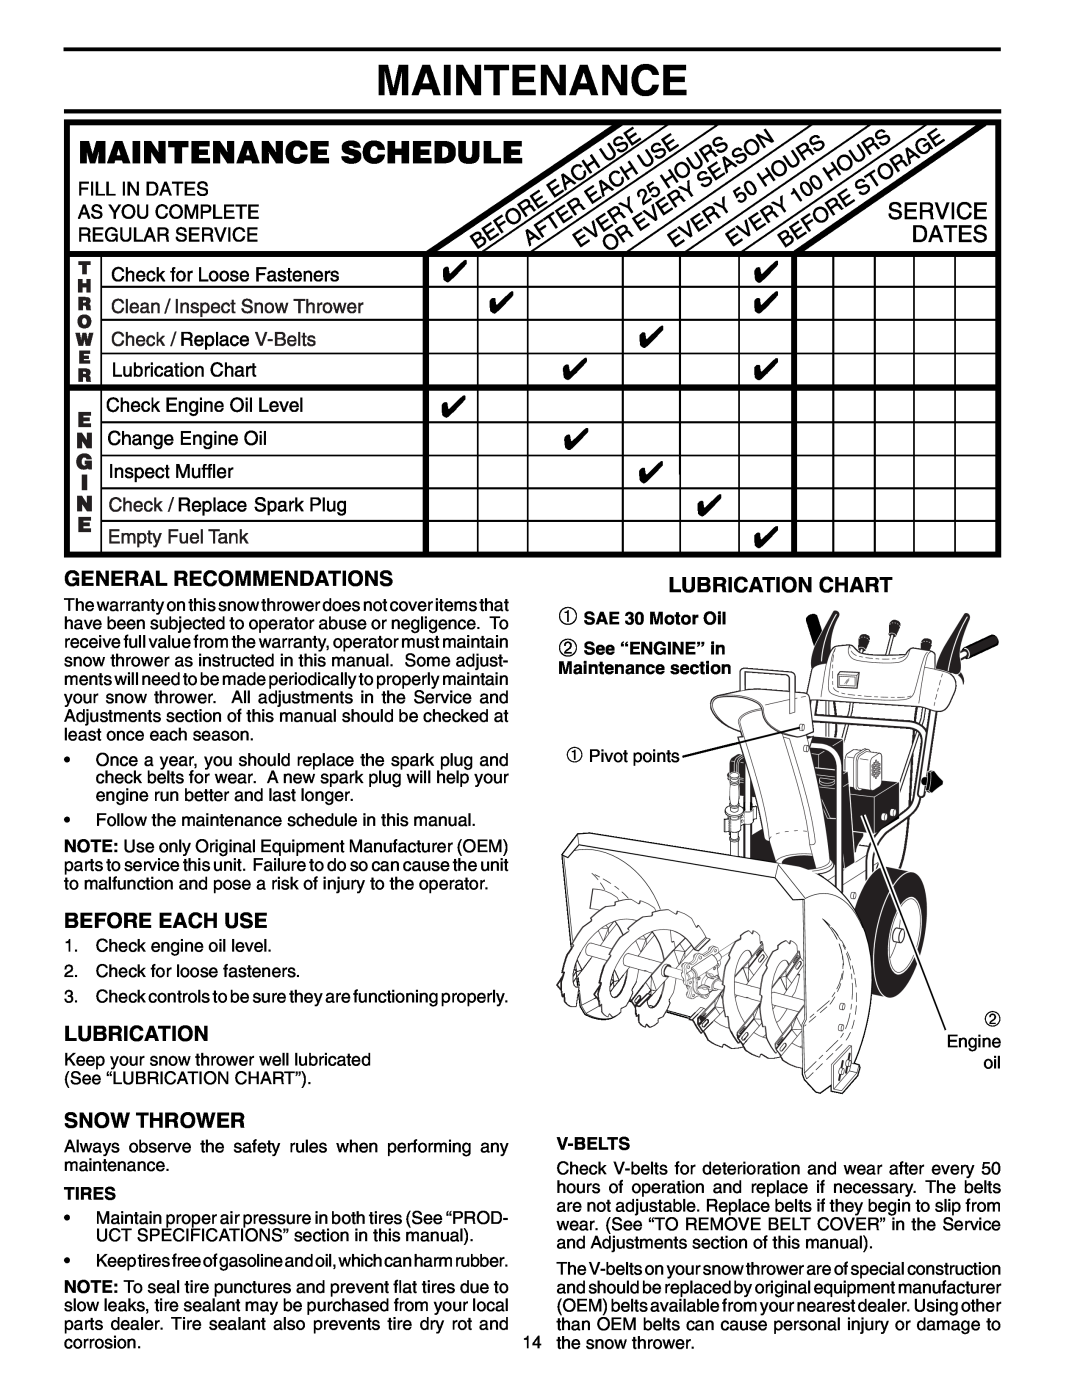 Poulan PO927ES owner manual Maintenance, General Recommendations, Before Each Use, Lubrication Chart, Snow Thrower 